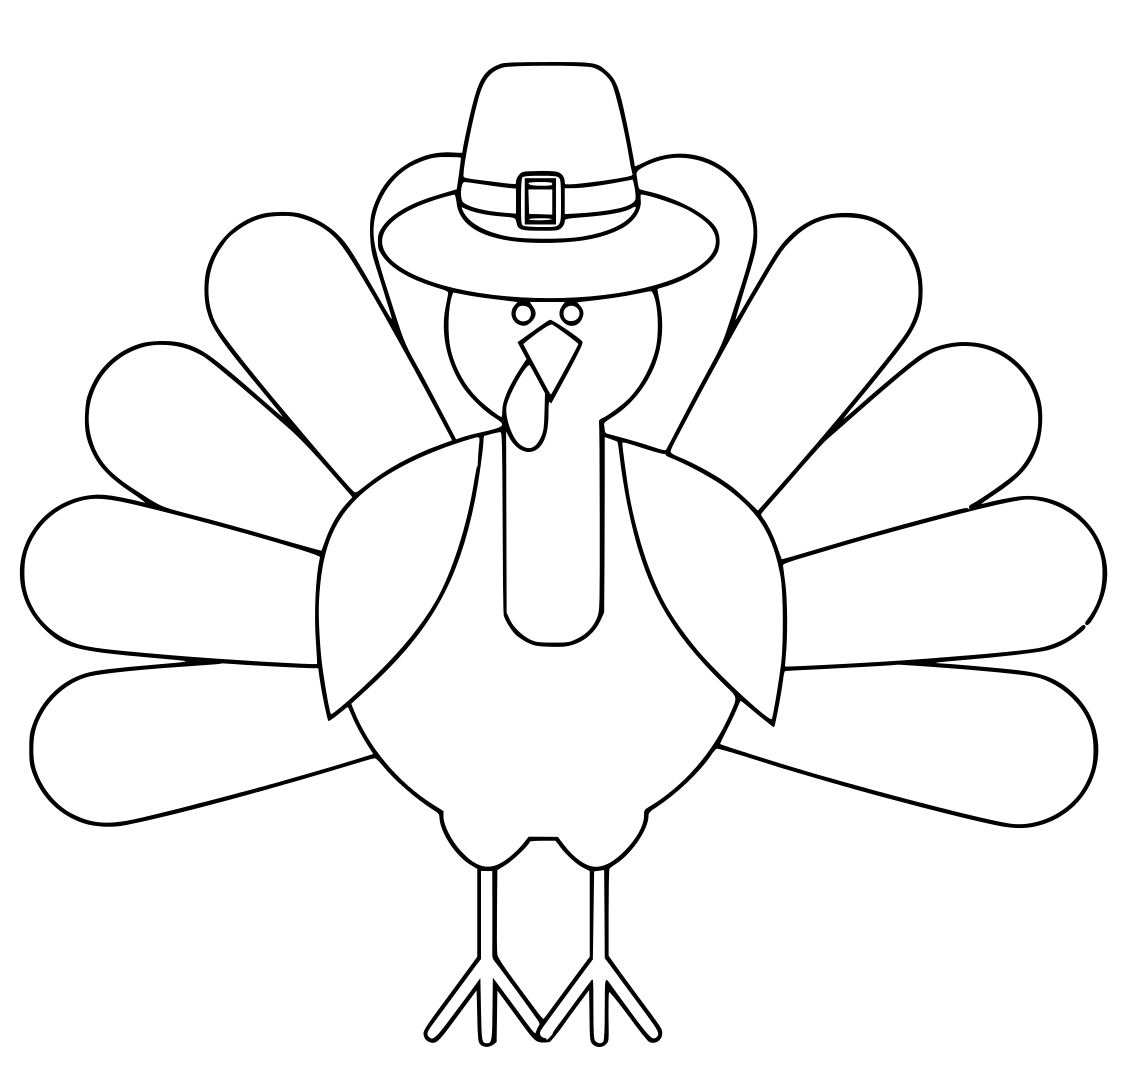 Turkey Thanksgiving Day Simple Easy Coloring Page